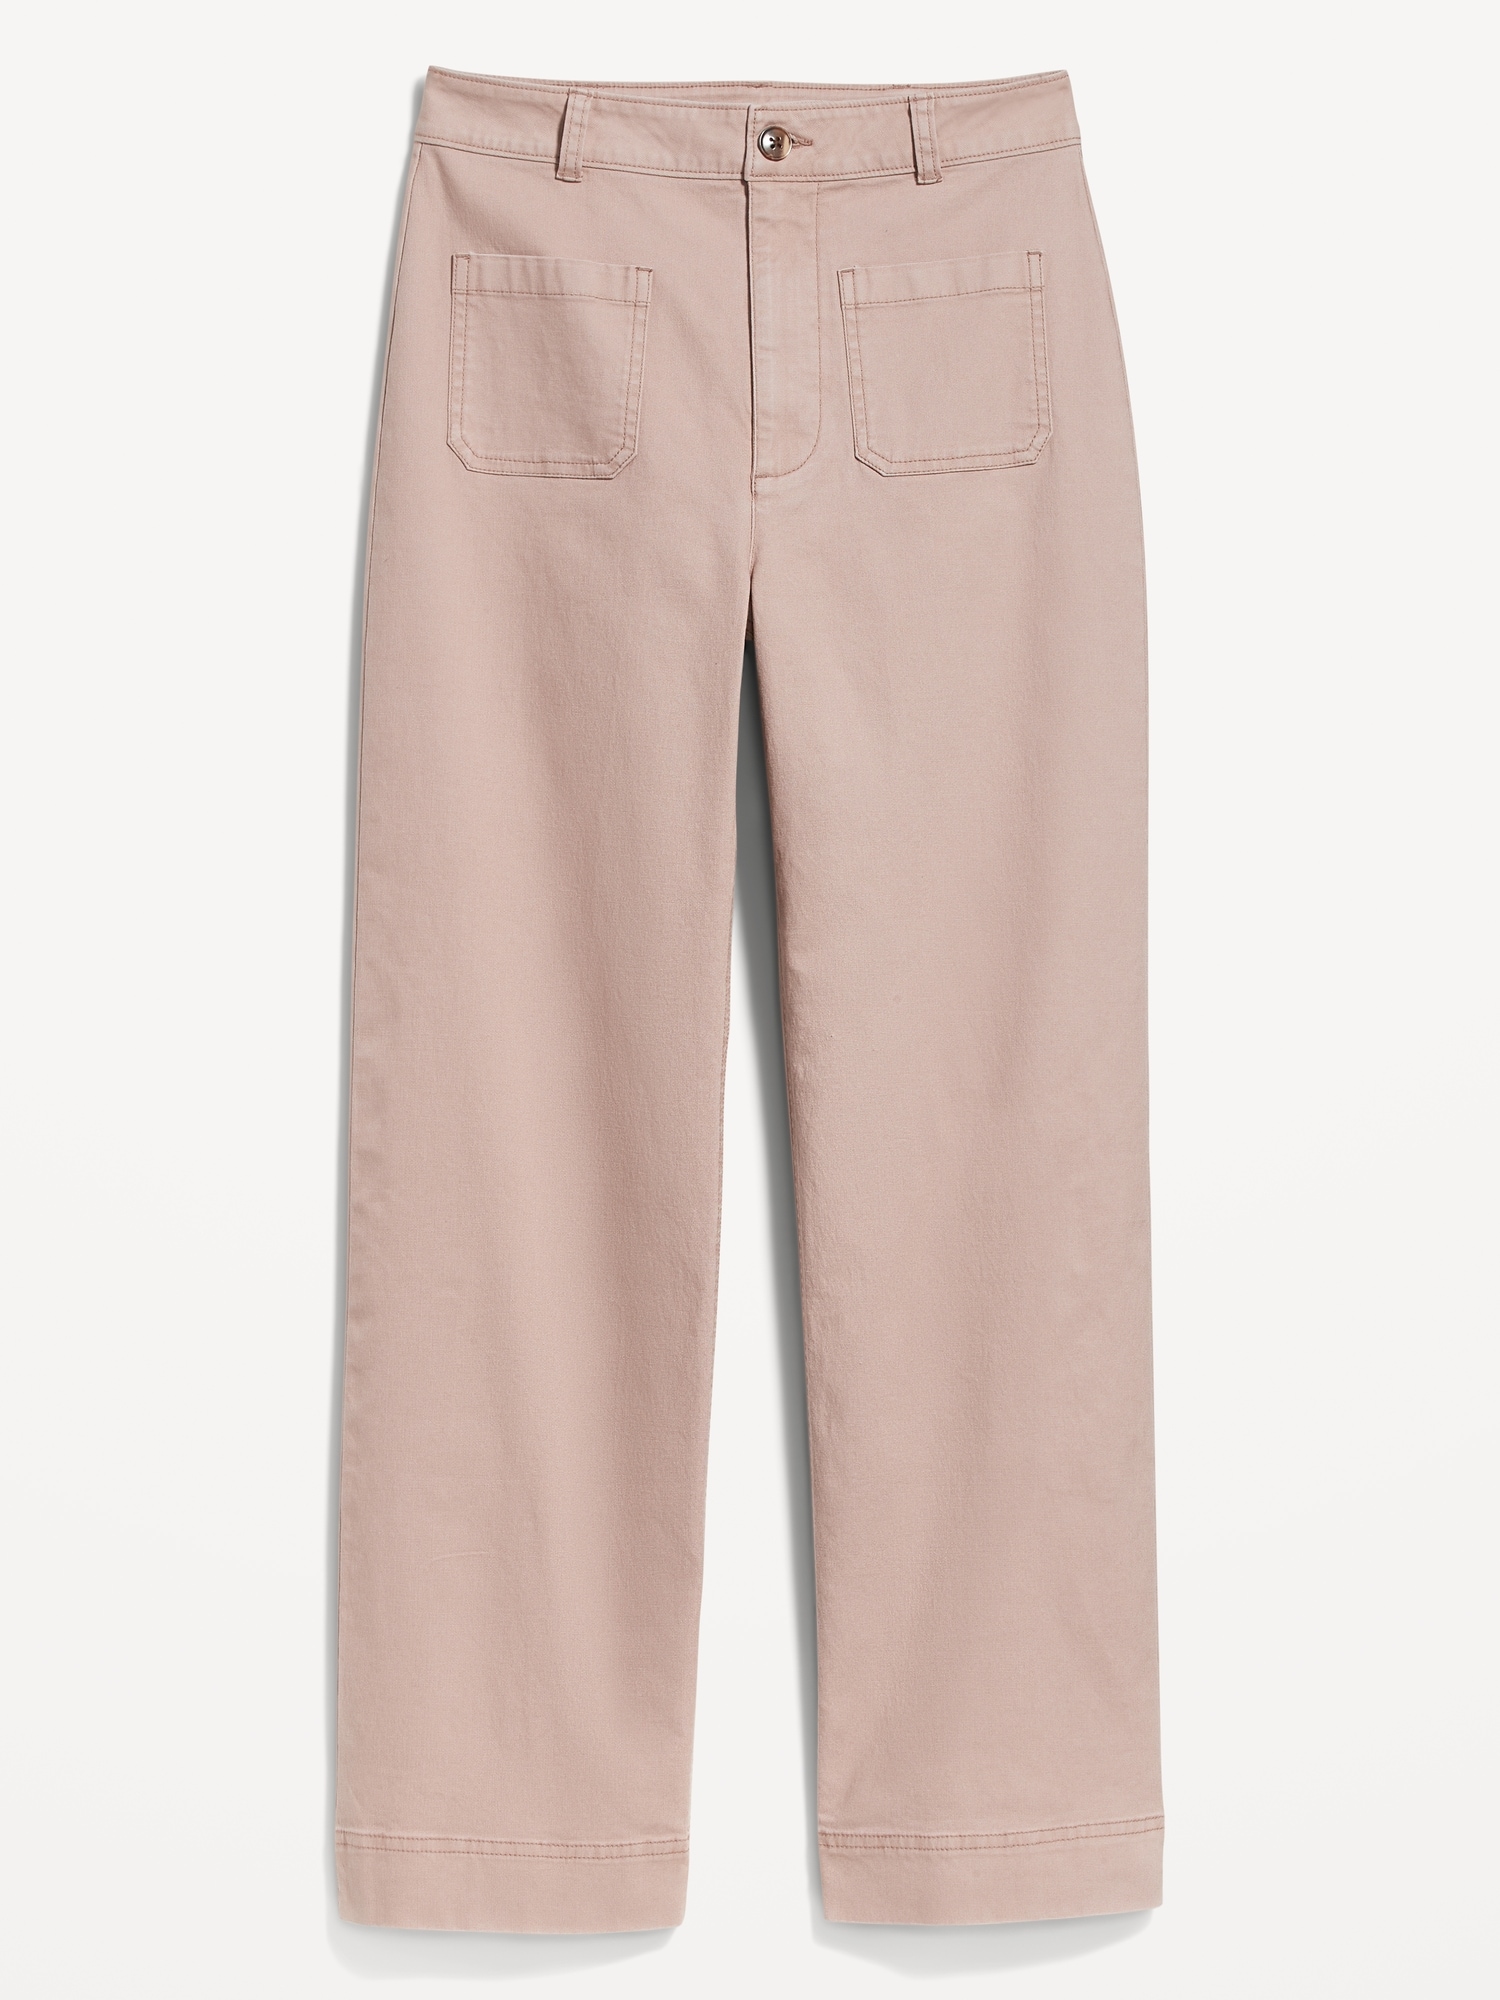 Old Navy Women's High-Waisted Cropped Linen Pants Mollusk Muted Pink Size  4X